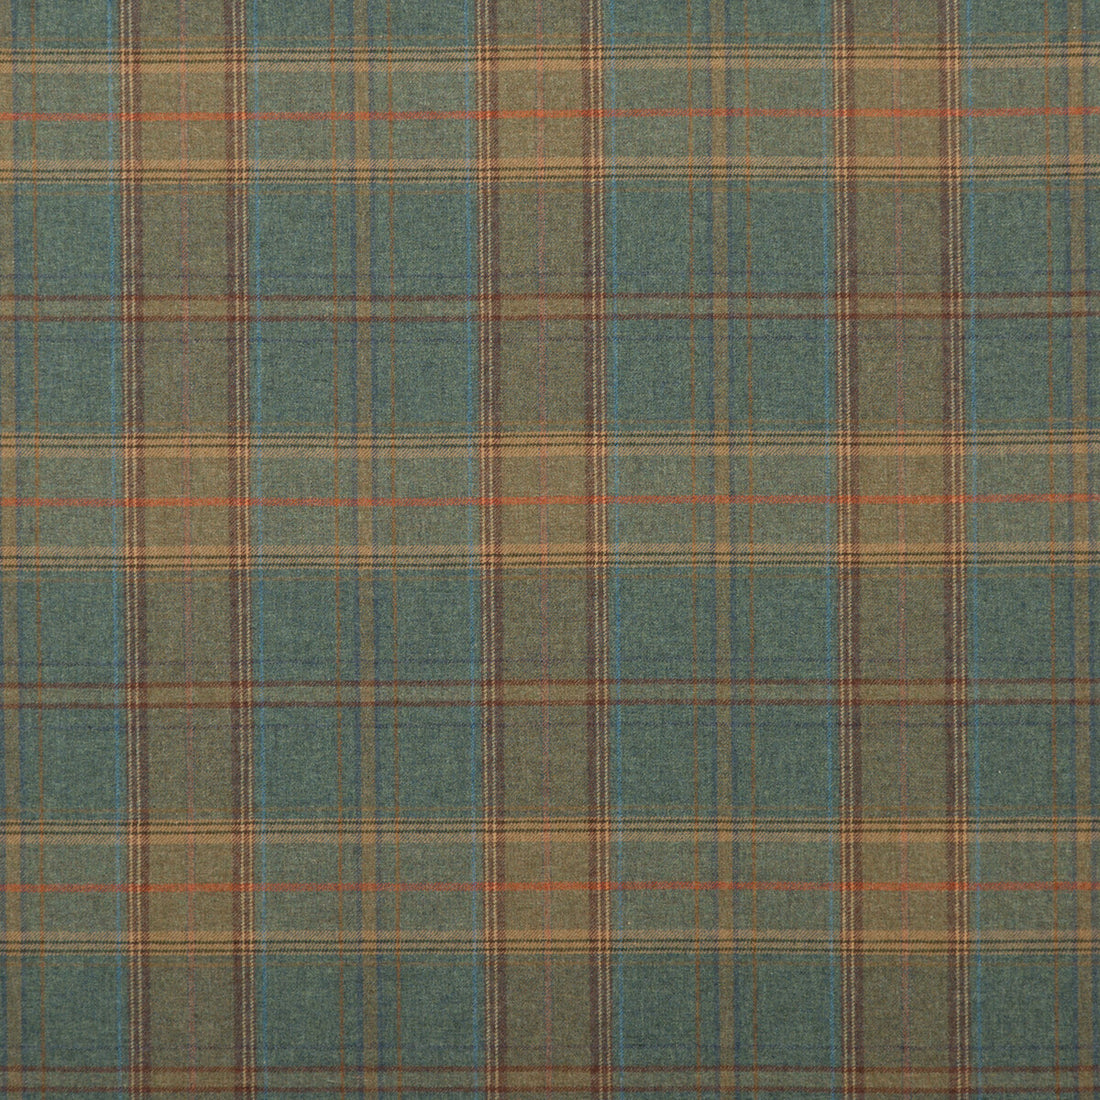 Shetland Plaid fabric in teal color - pattern FD344.R11.0 - by Mulberry in the Bohemian Romance collection